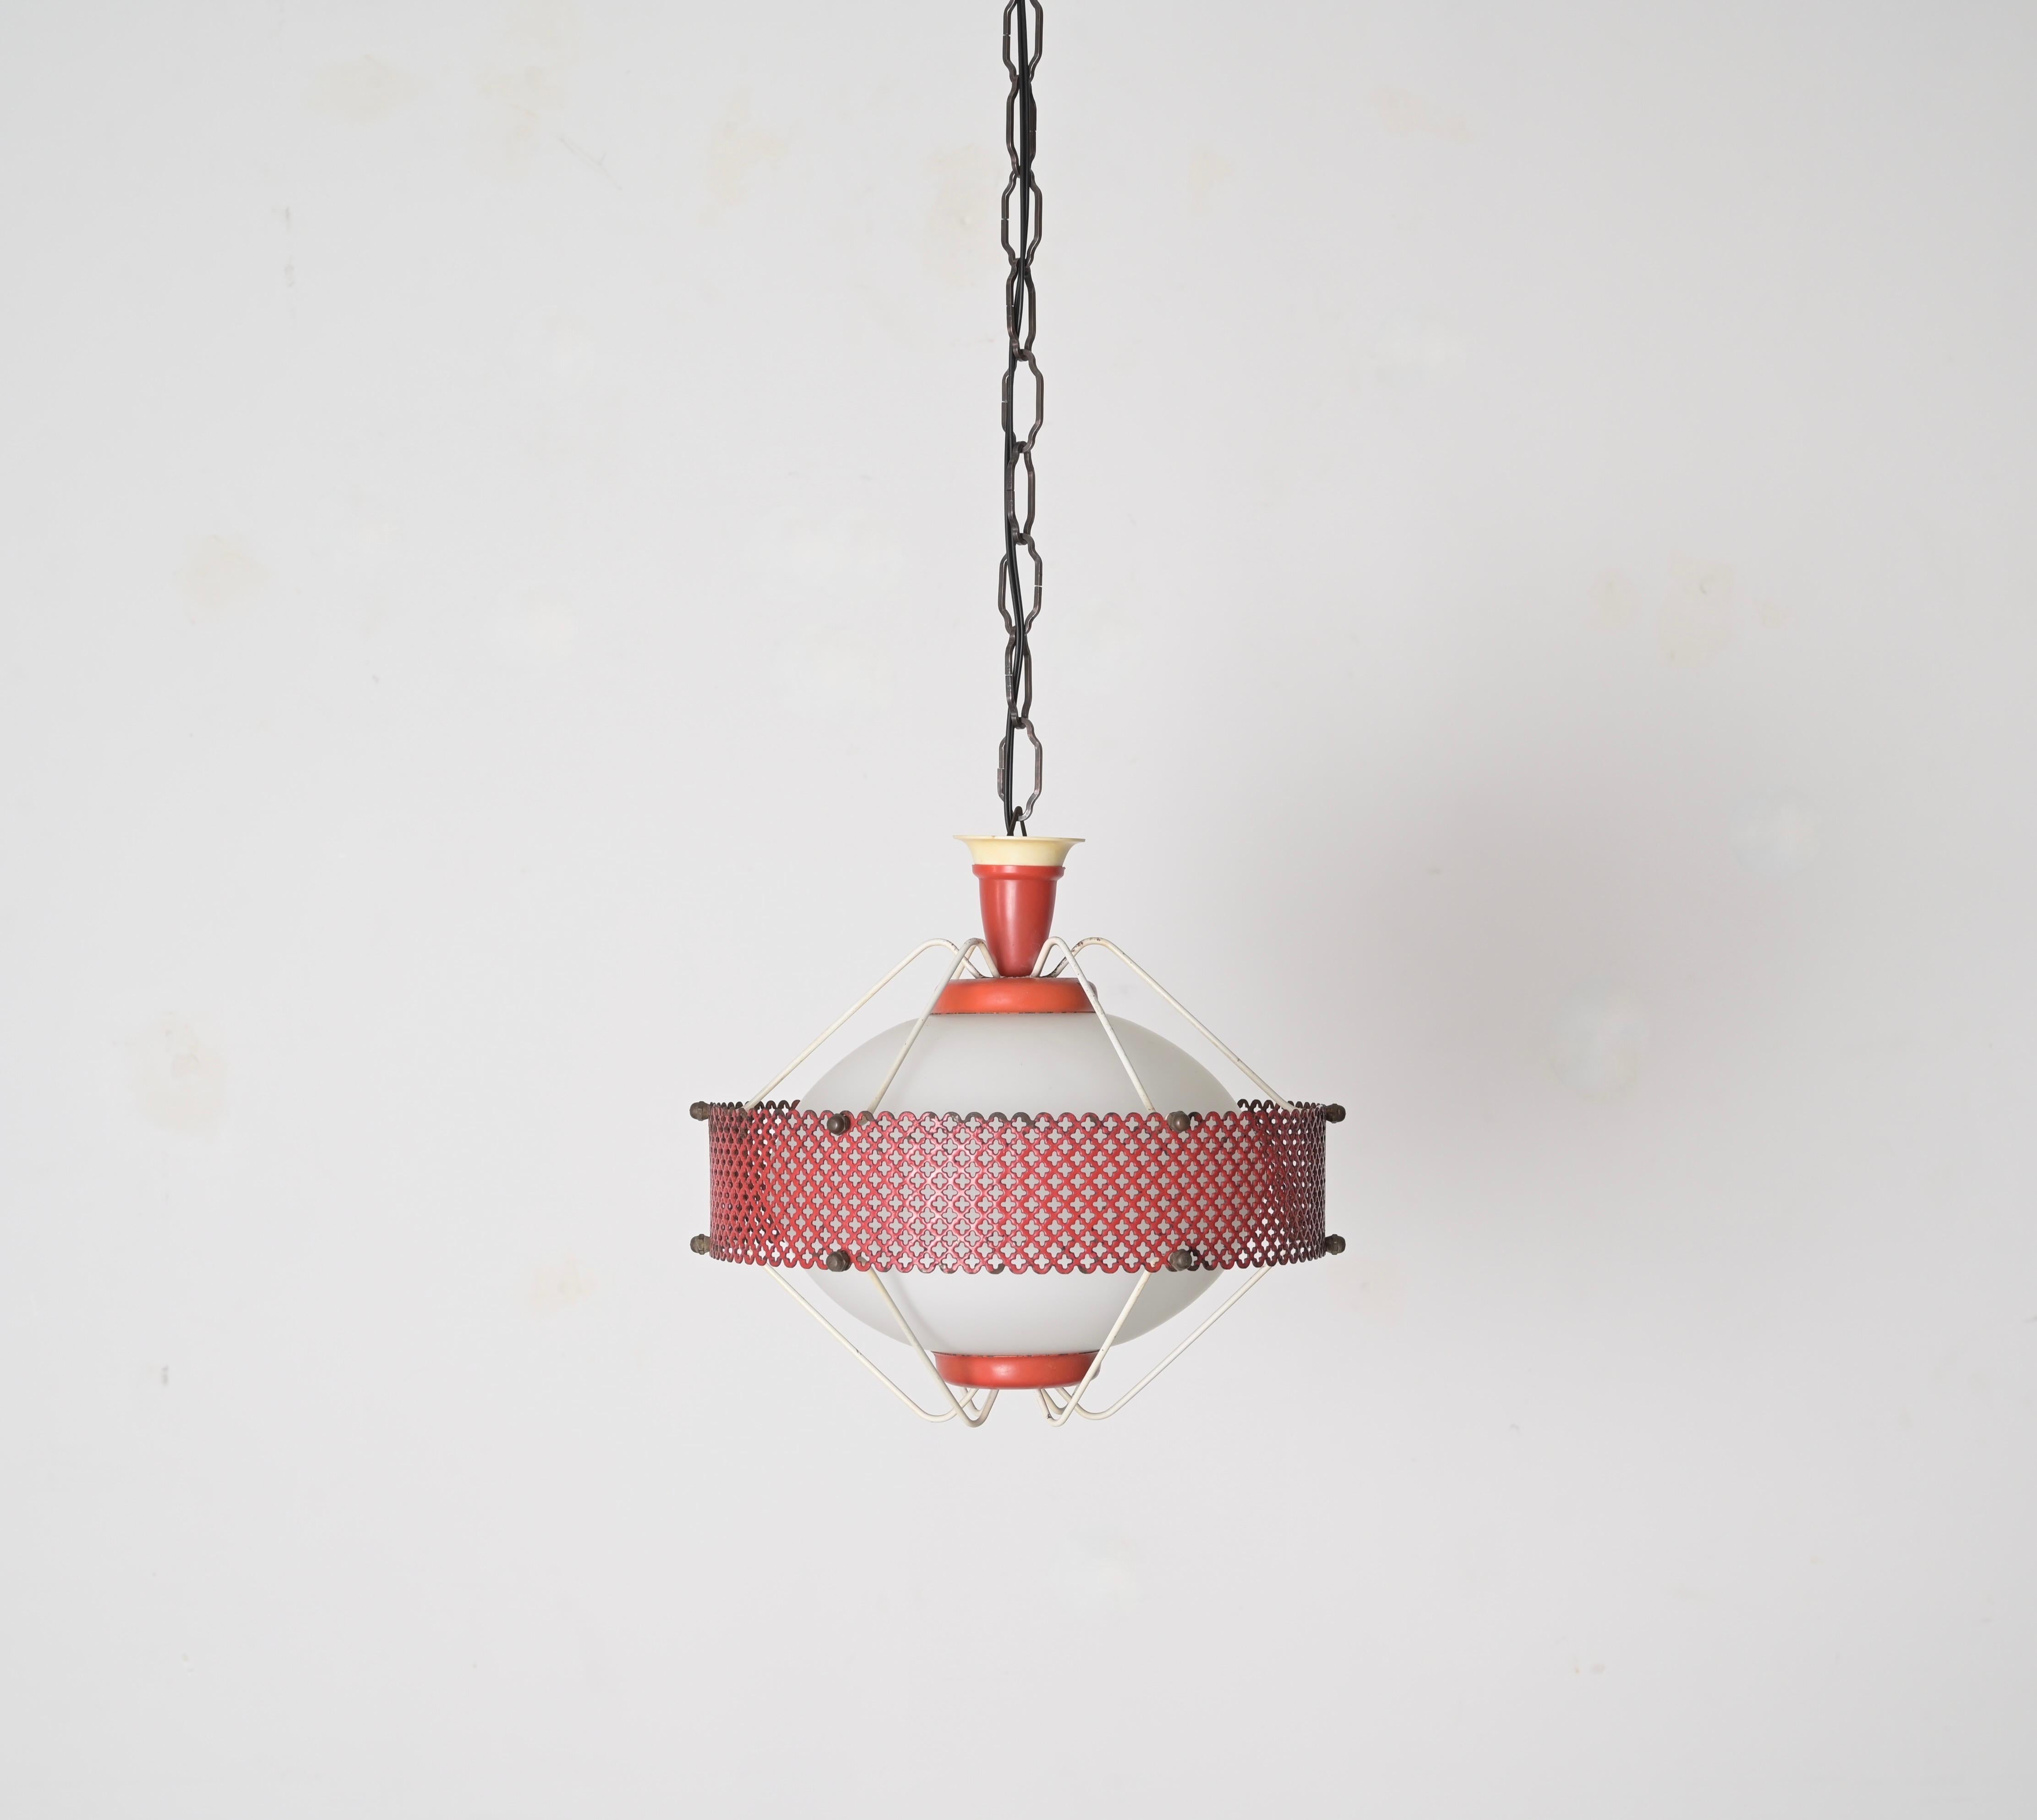 Mathieu Matégot Pendant Lamps in Opal Glass, Red Metal, 1950s French Lighting For Sale 4